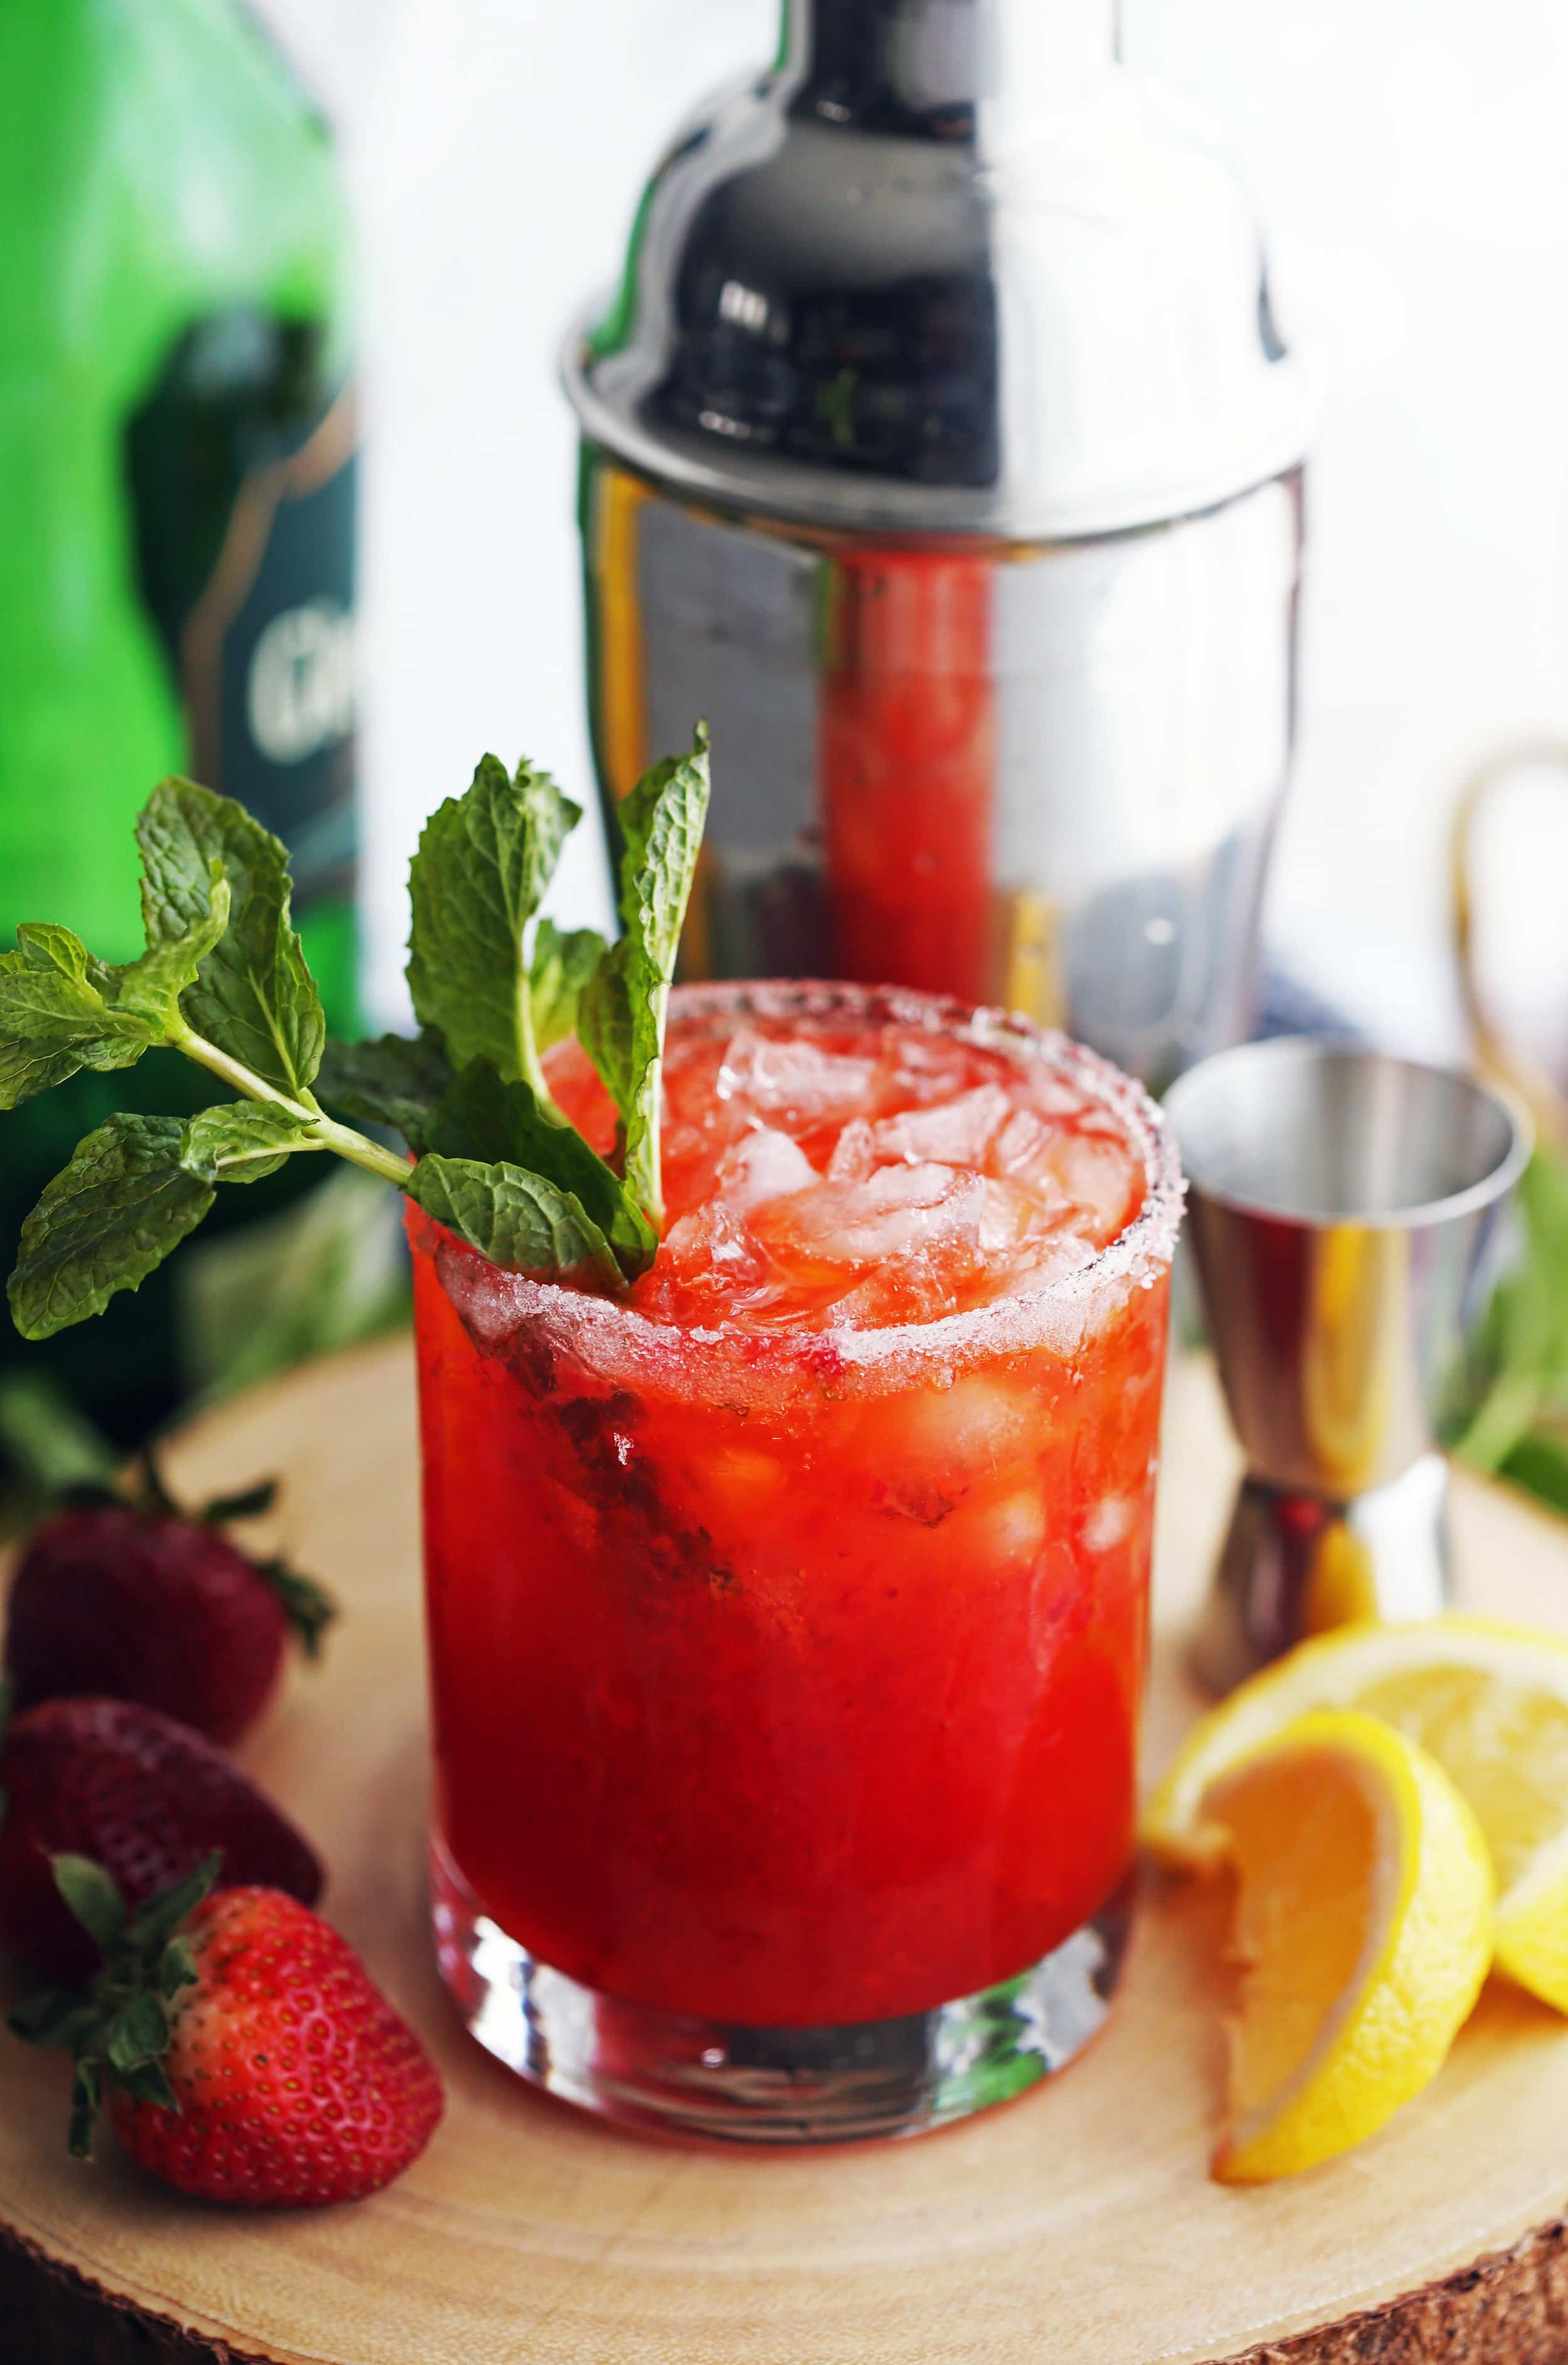 A closeup photo of a Mint Strawberry Whisky Smash Cocktail garnished with a fresh mint sprig.